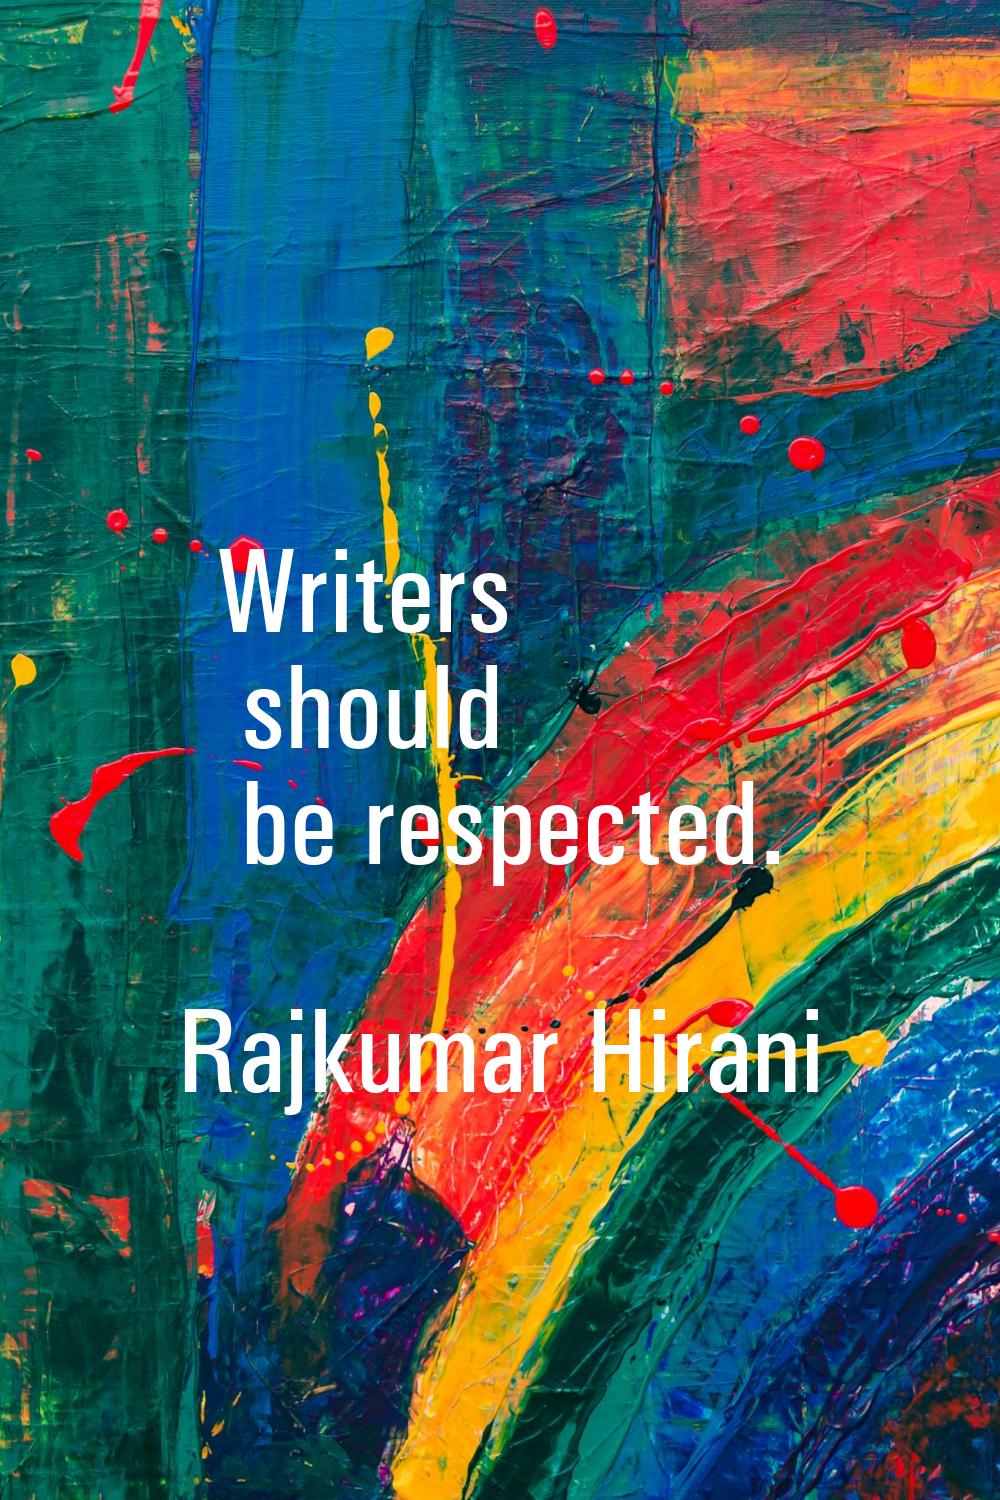 Writers should be respected.